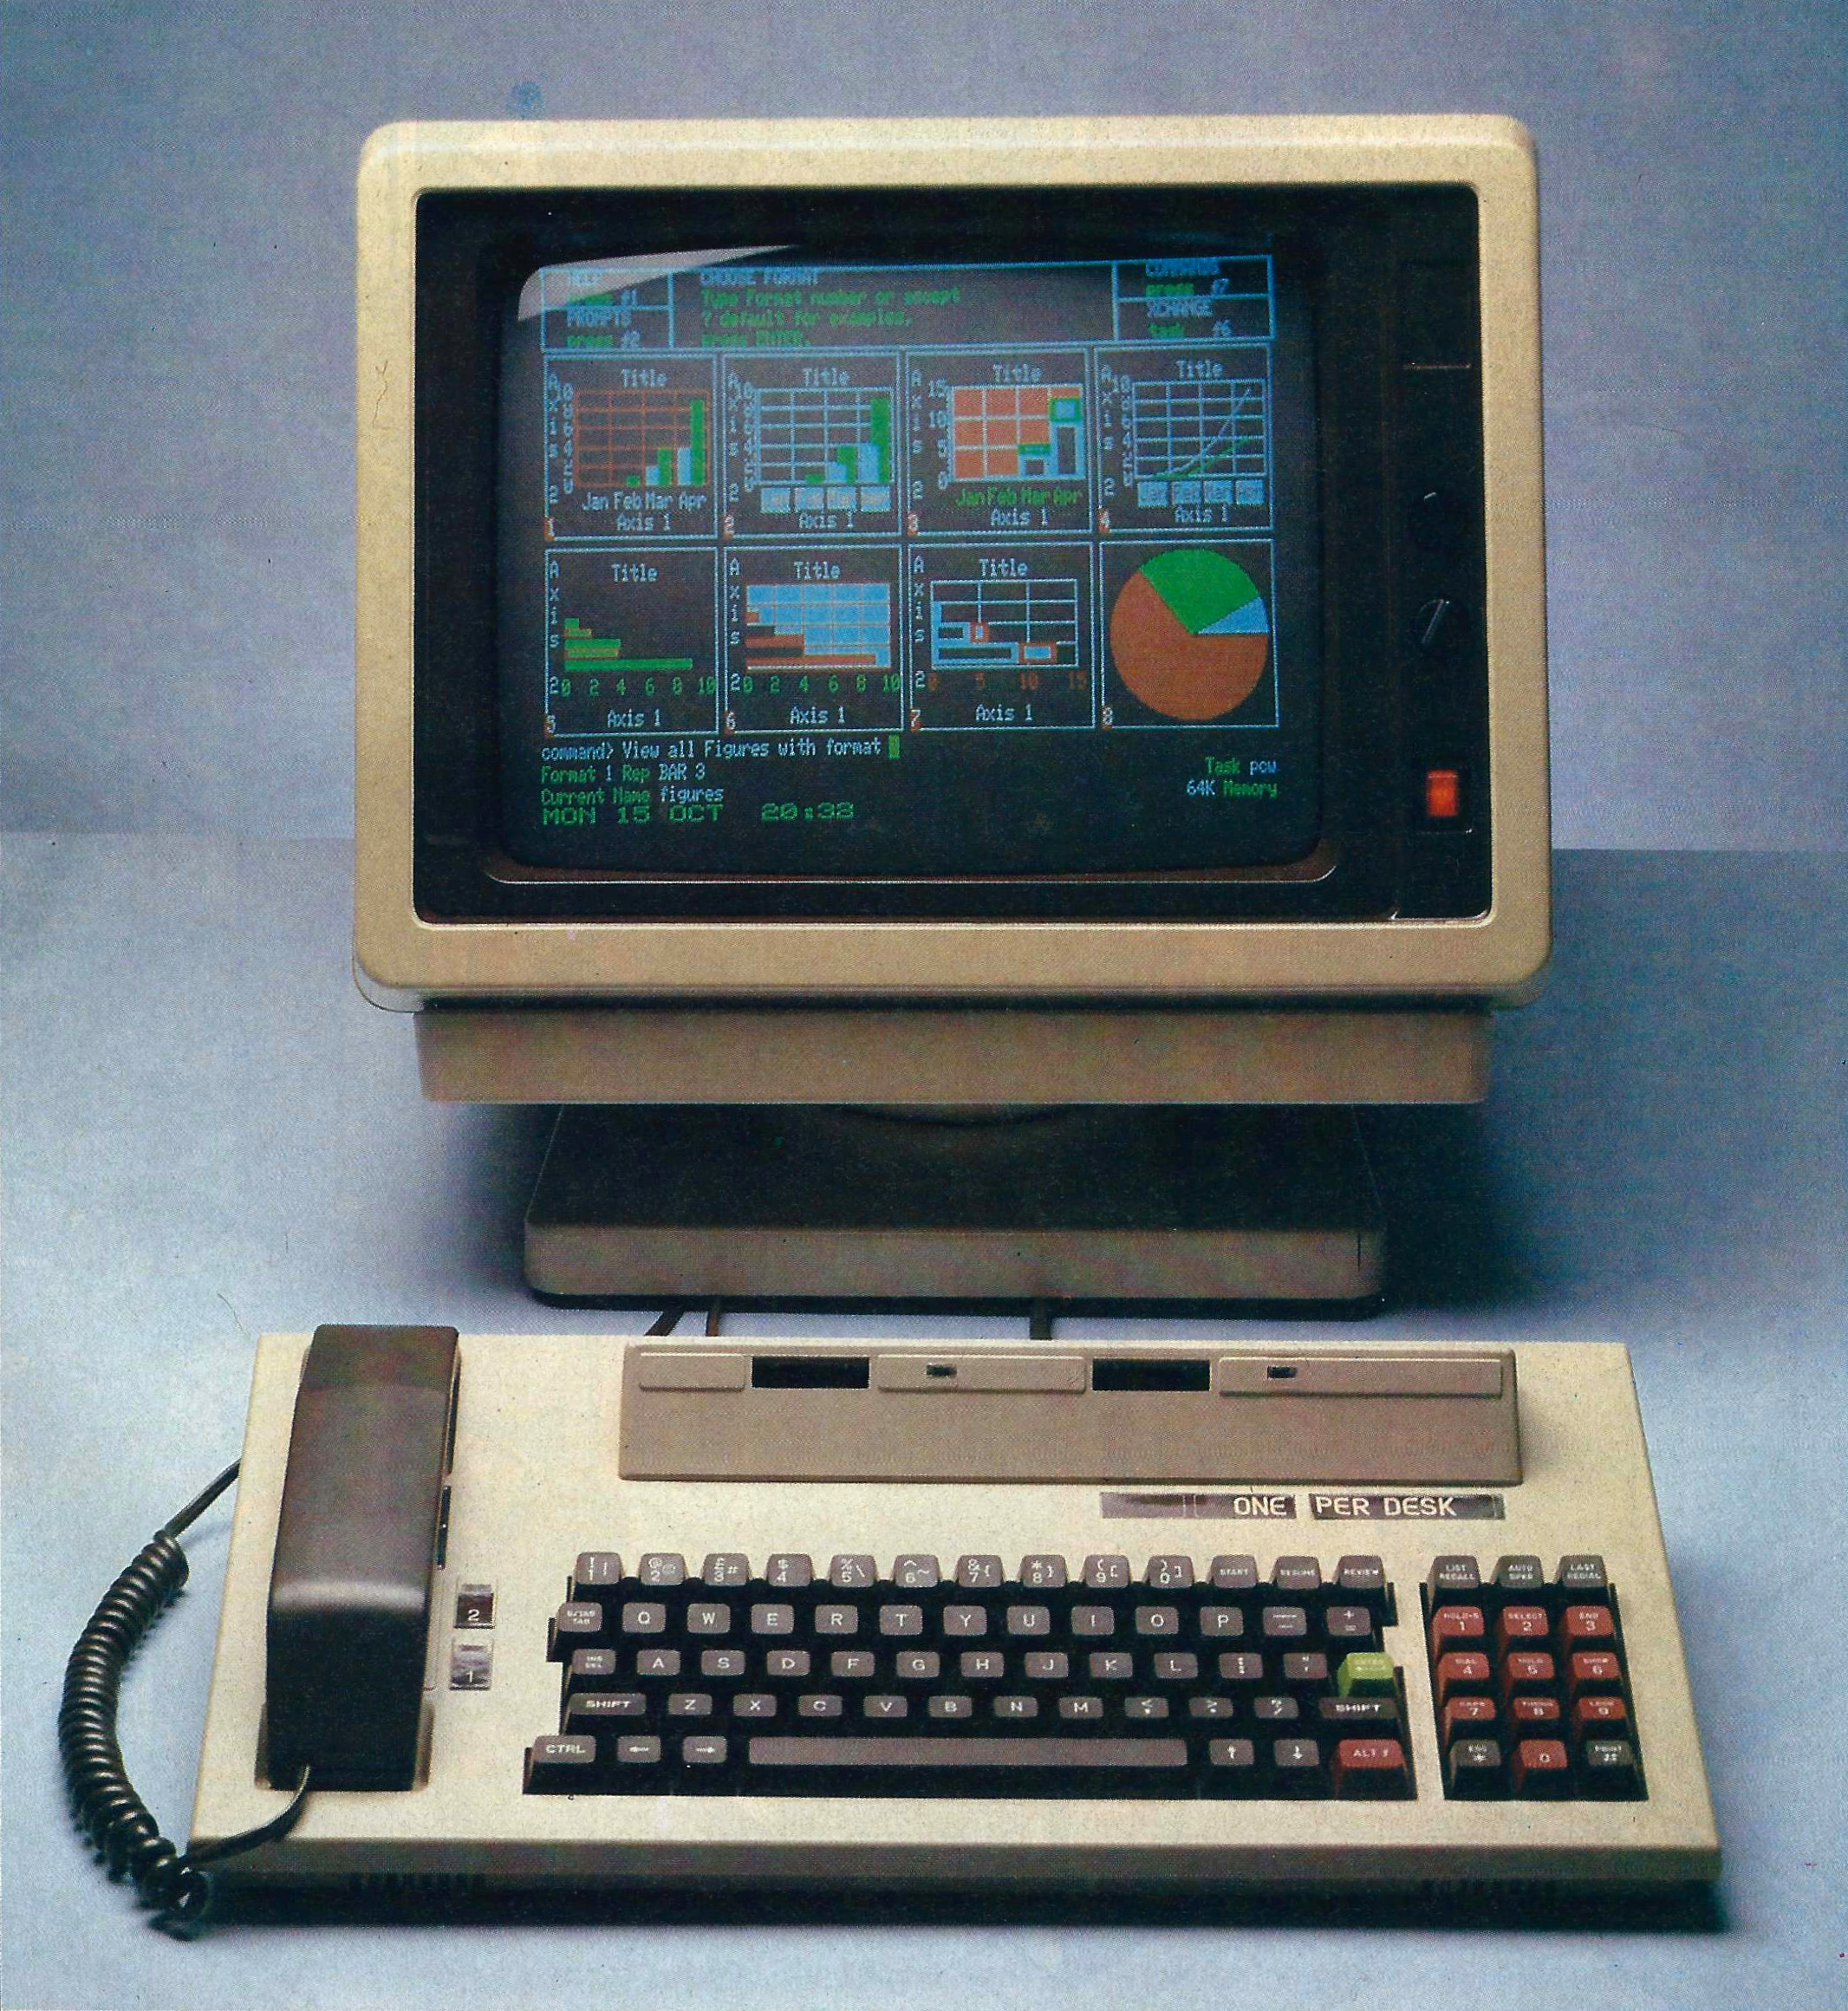 The ICL OPD - One Per Desk - from Personal Computer World, December 1984